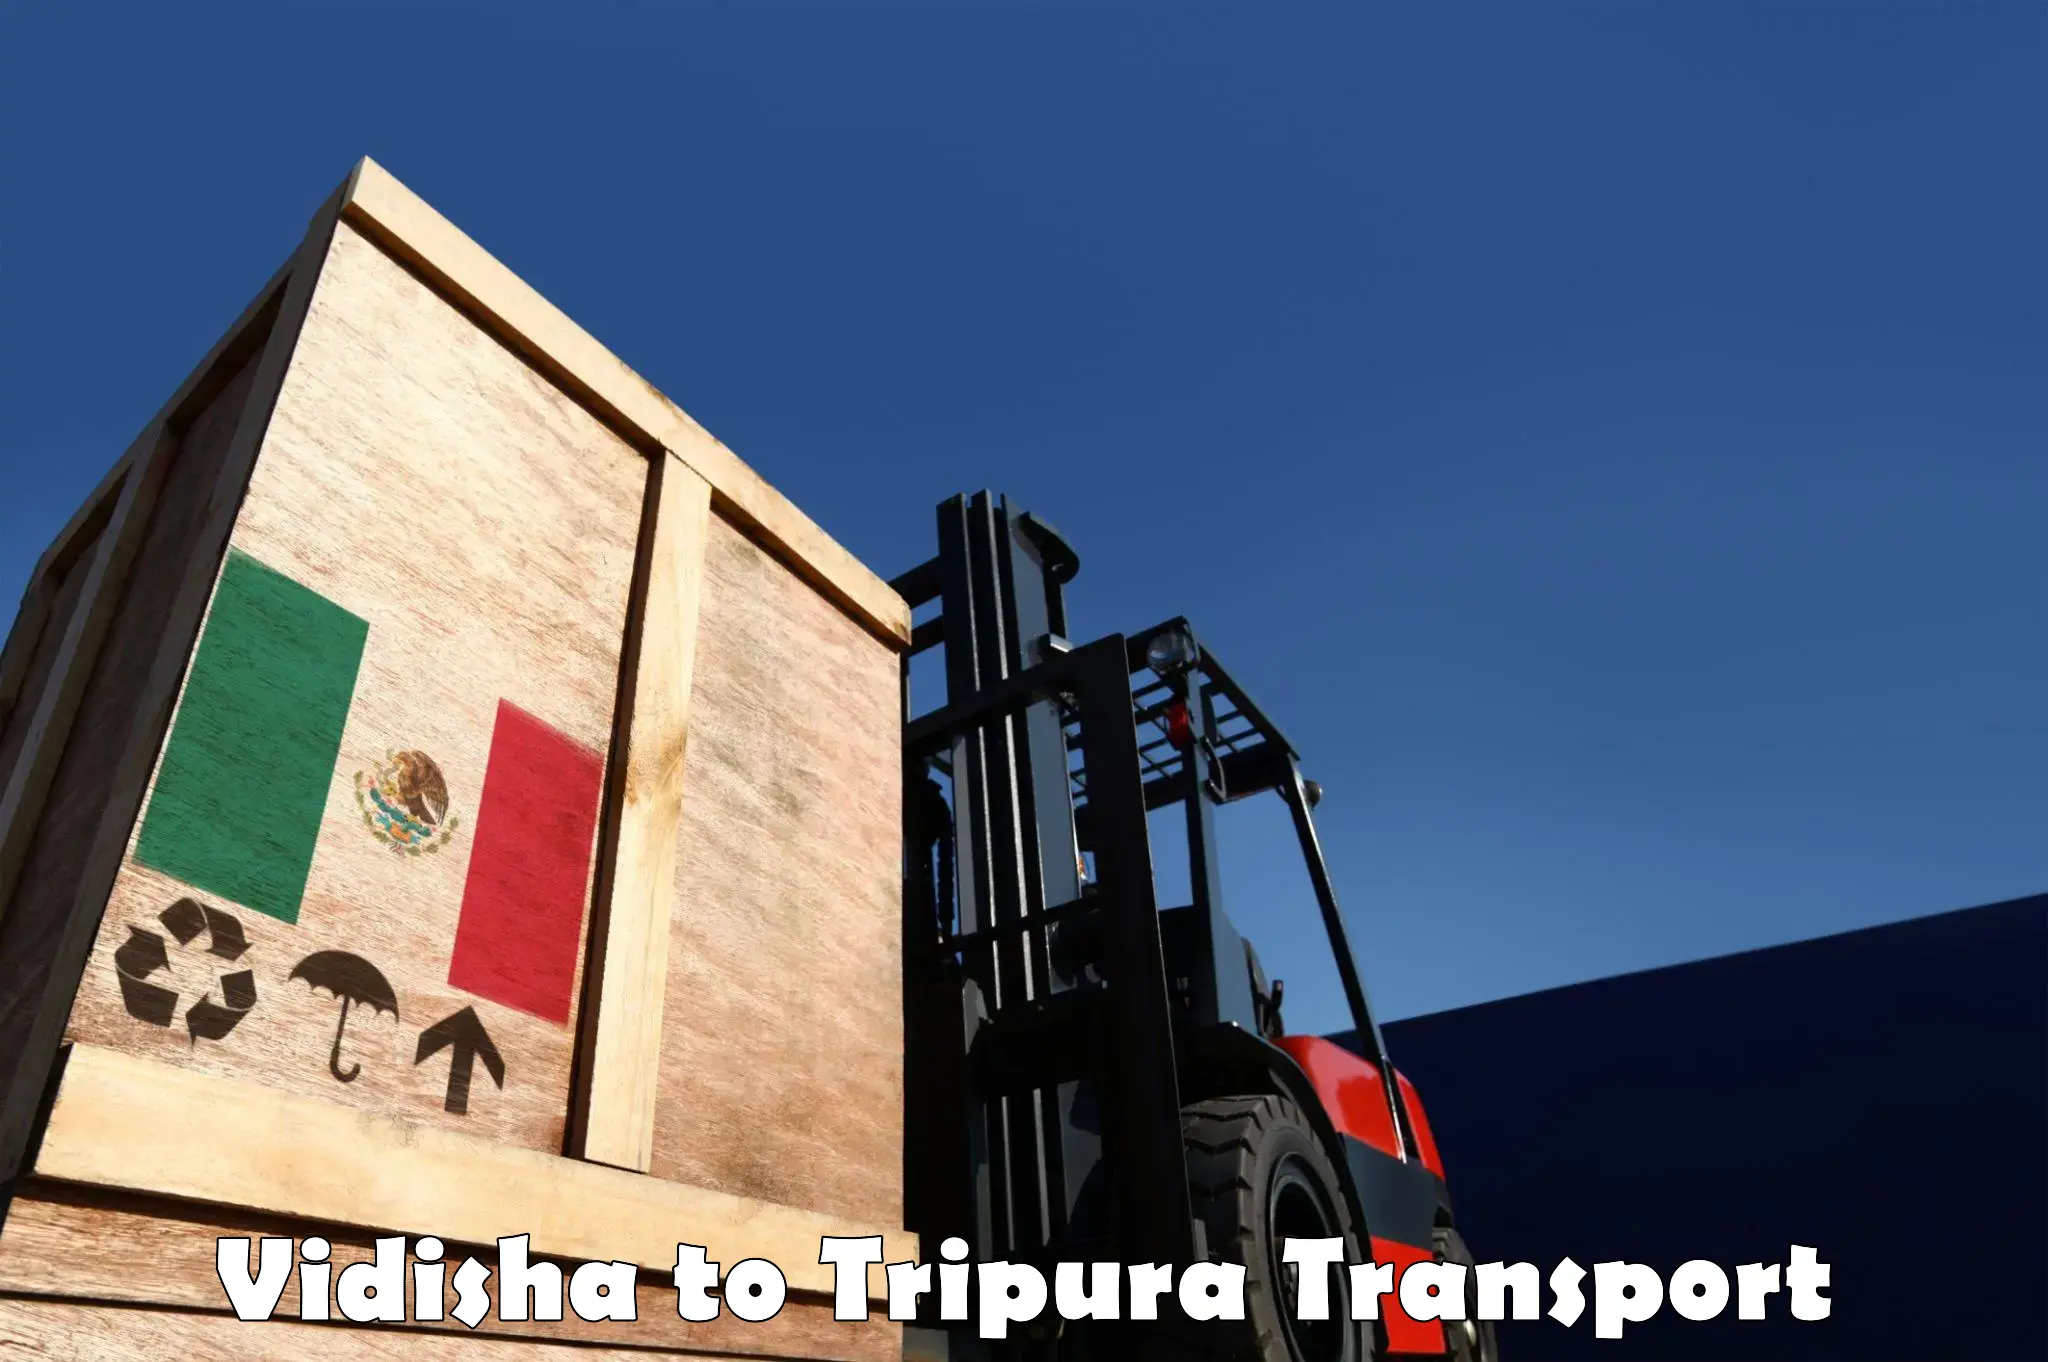 Transport bike from one state to another Vidisha to Udaipur Tripura